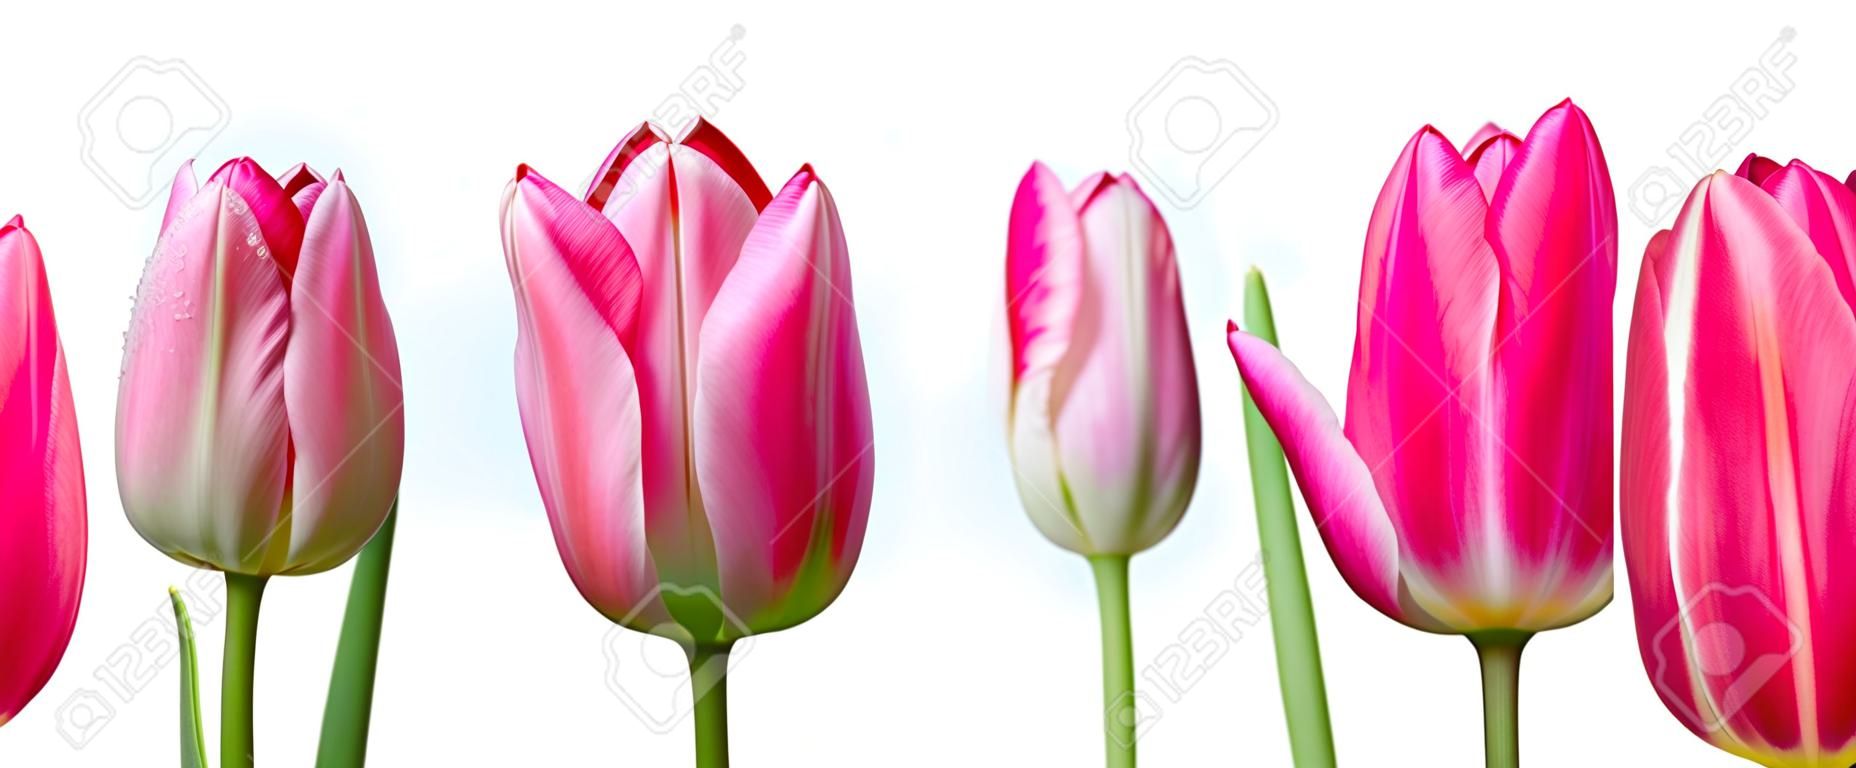 Tulips on white background. Close up. Stages of flowering tulip. From green bud to lush pink flower.